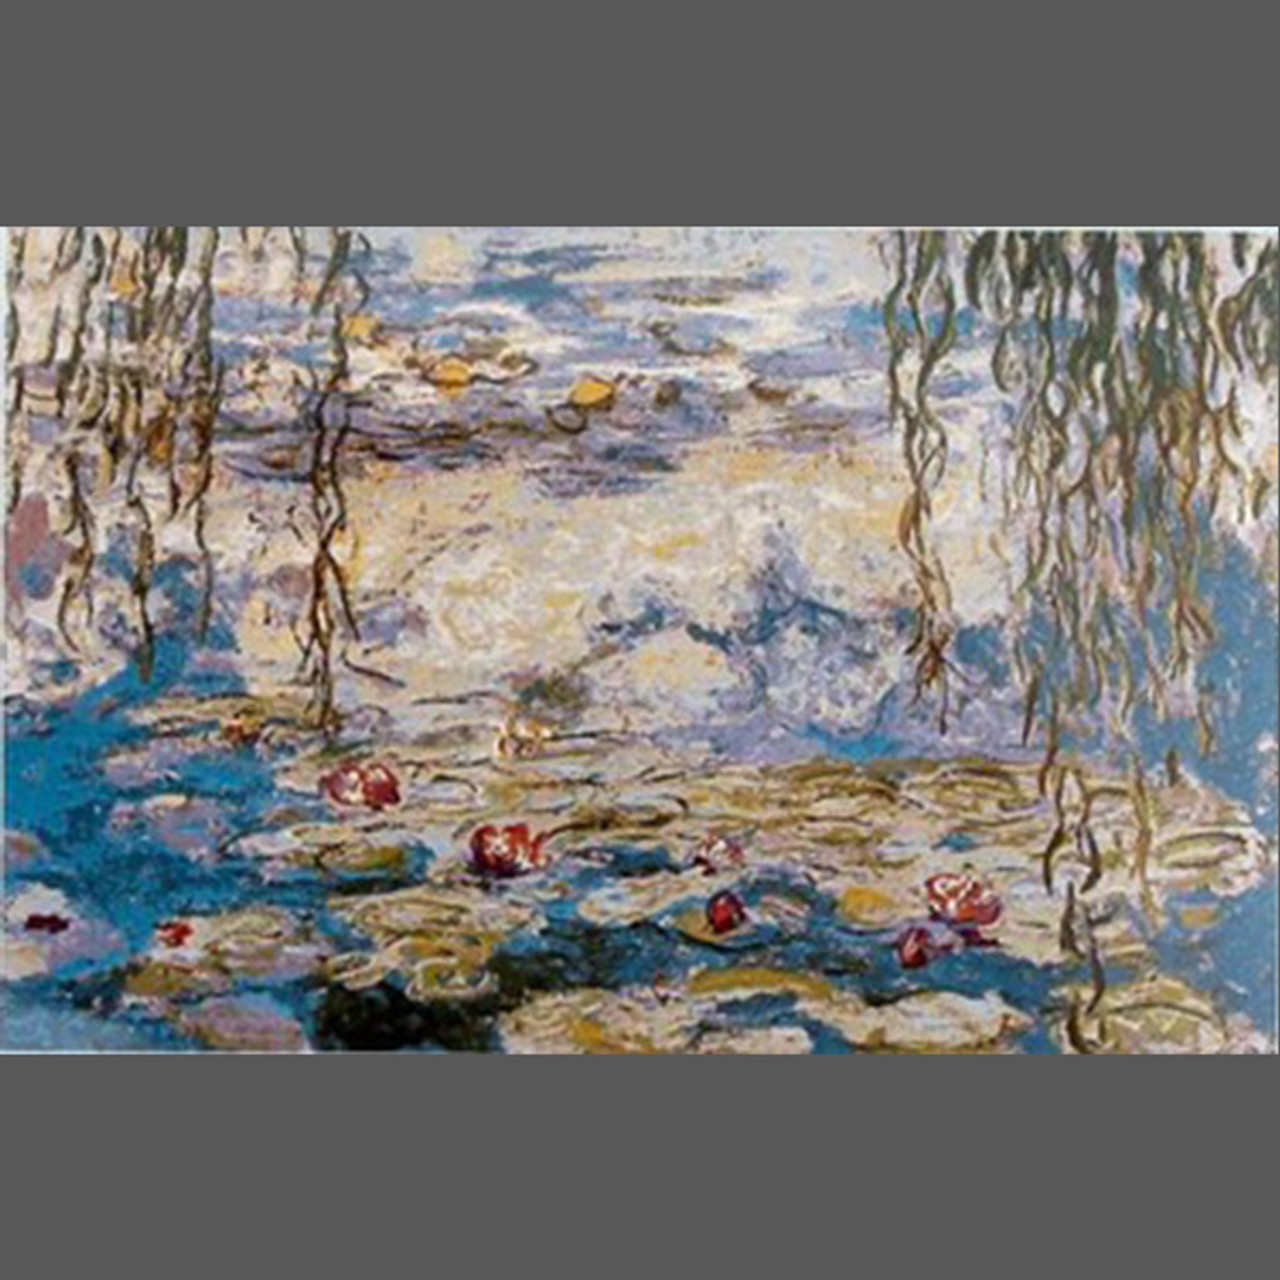 Nympheas (Water Lilies) - Wall Tapestry